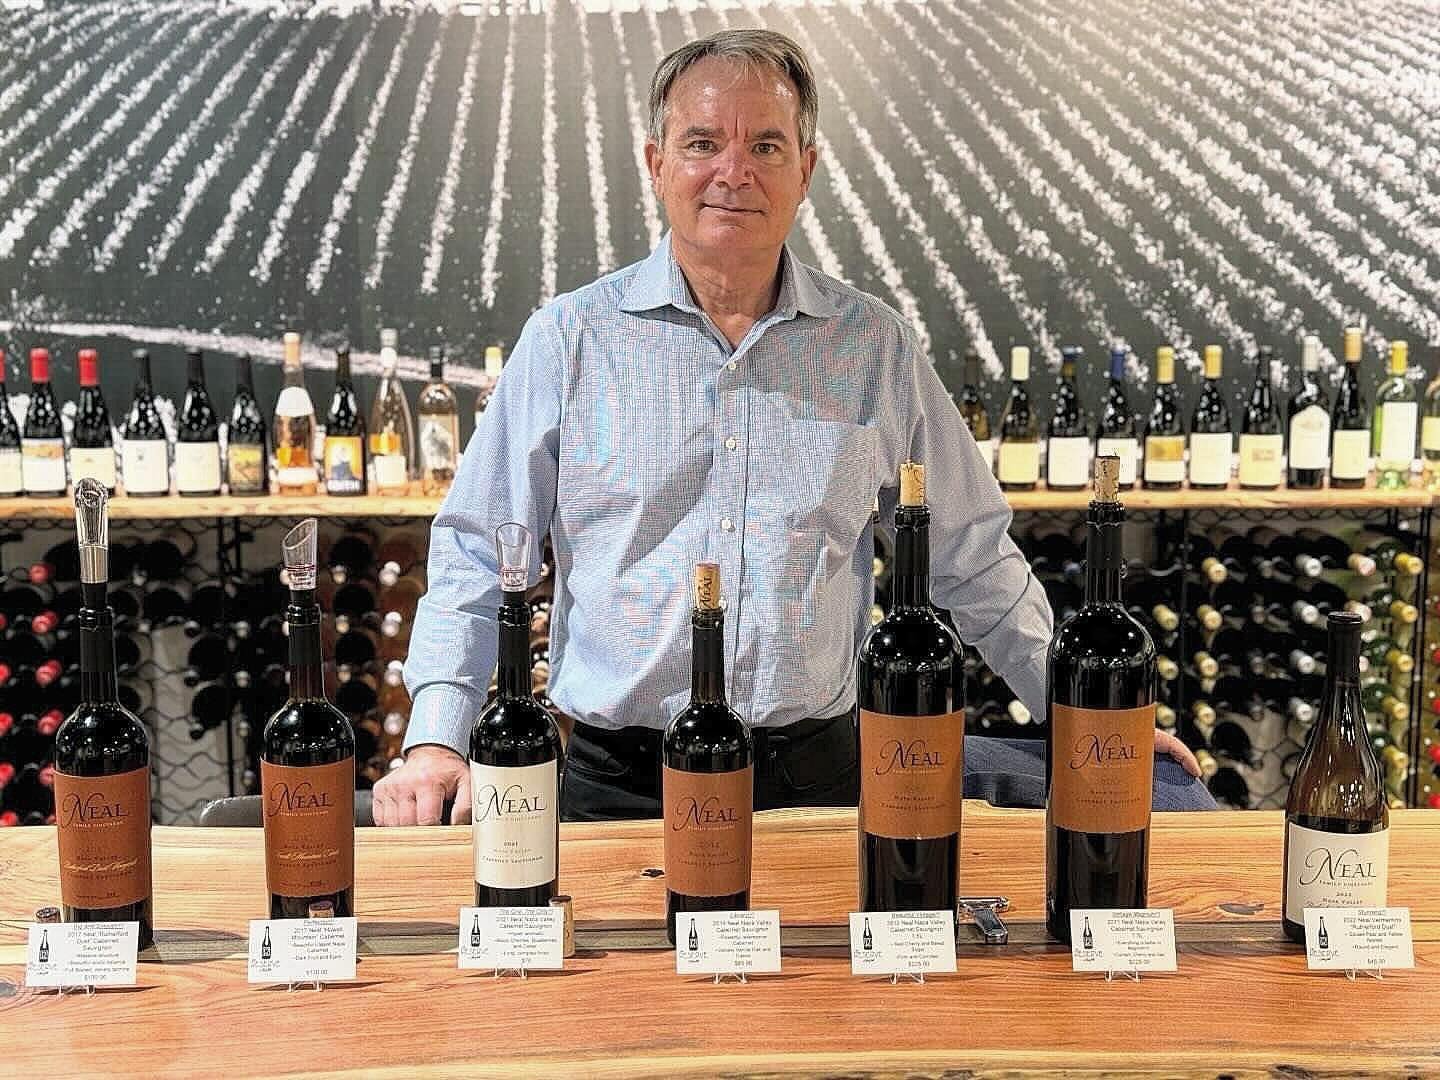 I&rsquo;m so grateful for the opportunity to sit down today with Napa Valleys very own Mark Neal of @nealvineyards to taste through several wines from his portfolio. A multigenerational family endeavor that has spearheaded biodynamic and organic vine